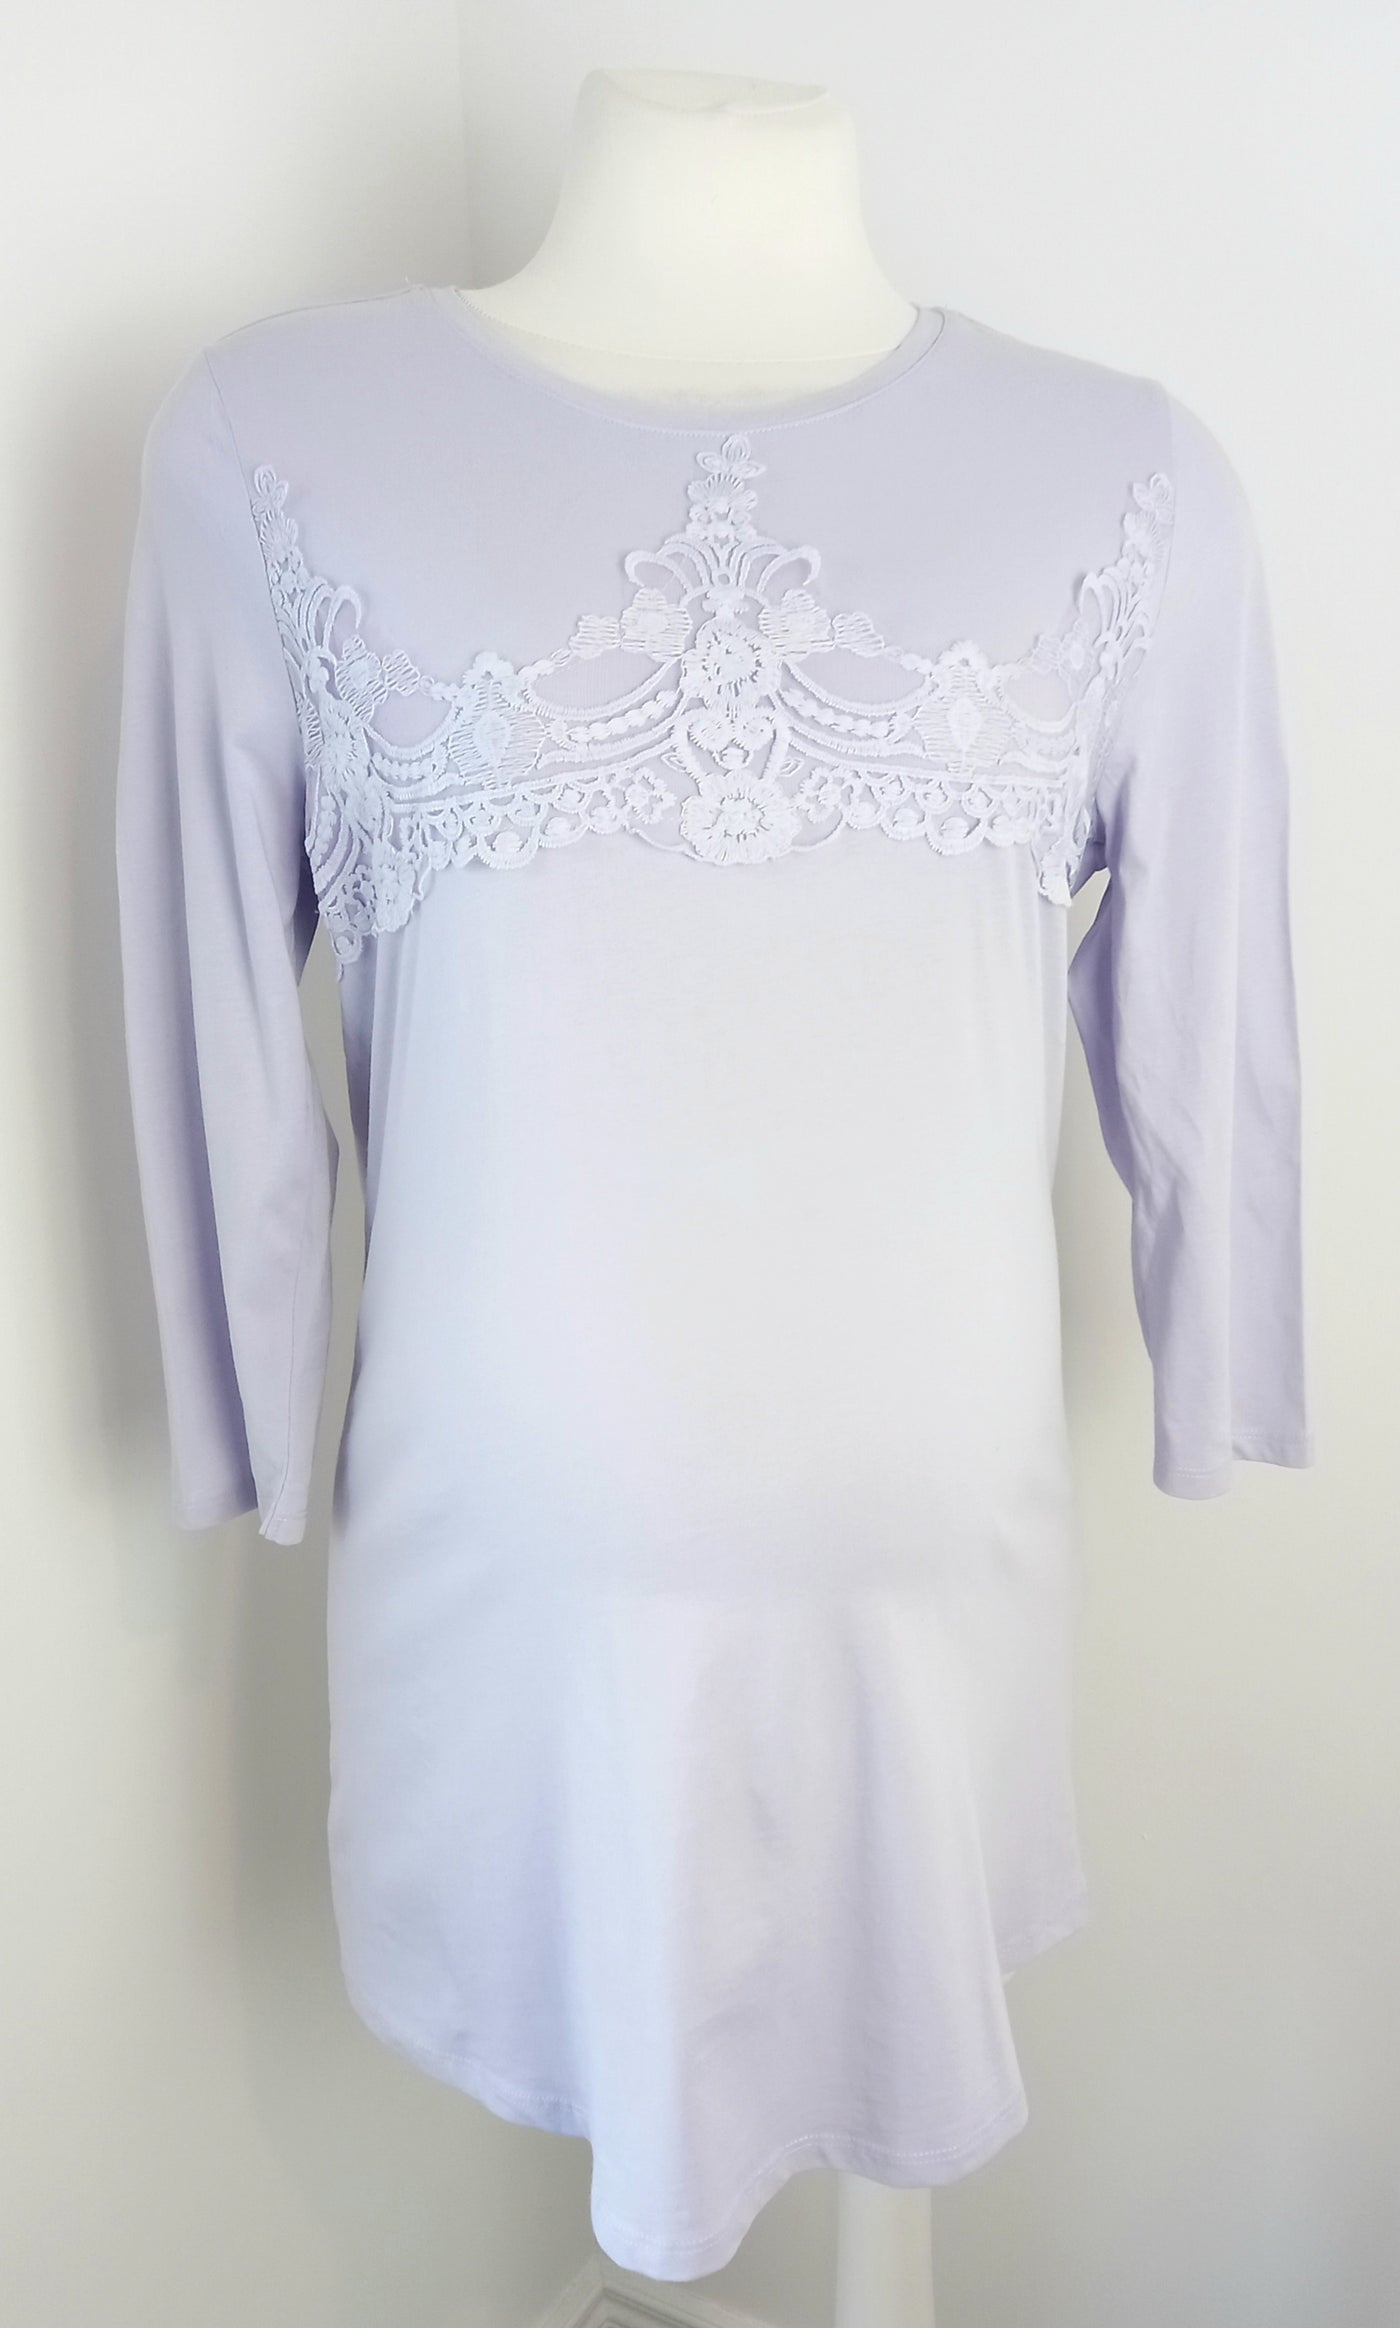 George Maternity, Lilac Long Sleeved Top - Size 8